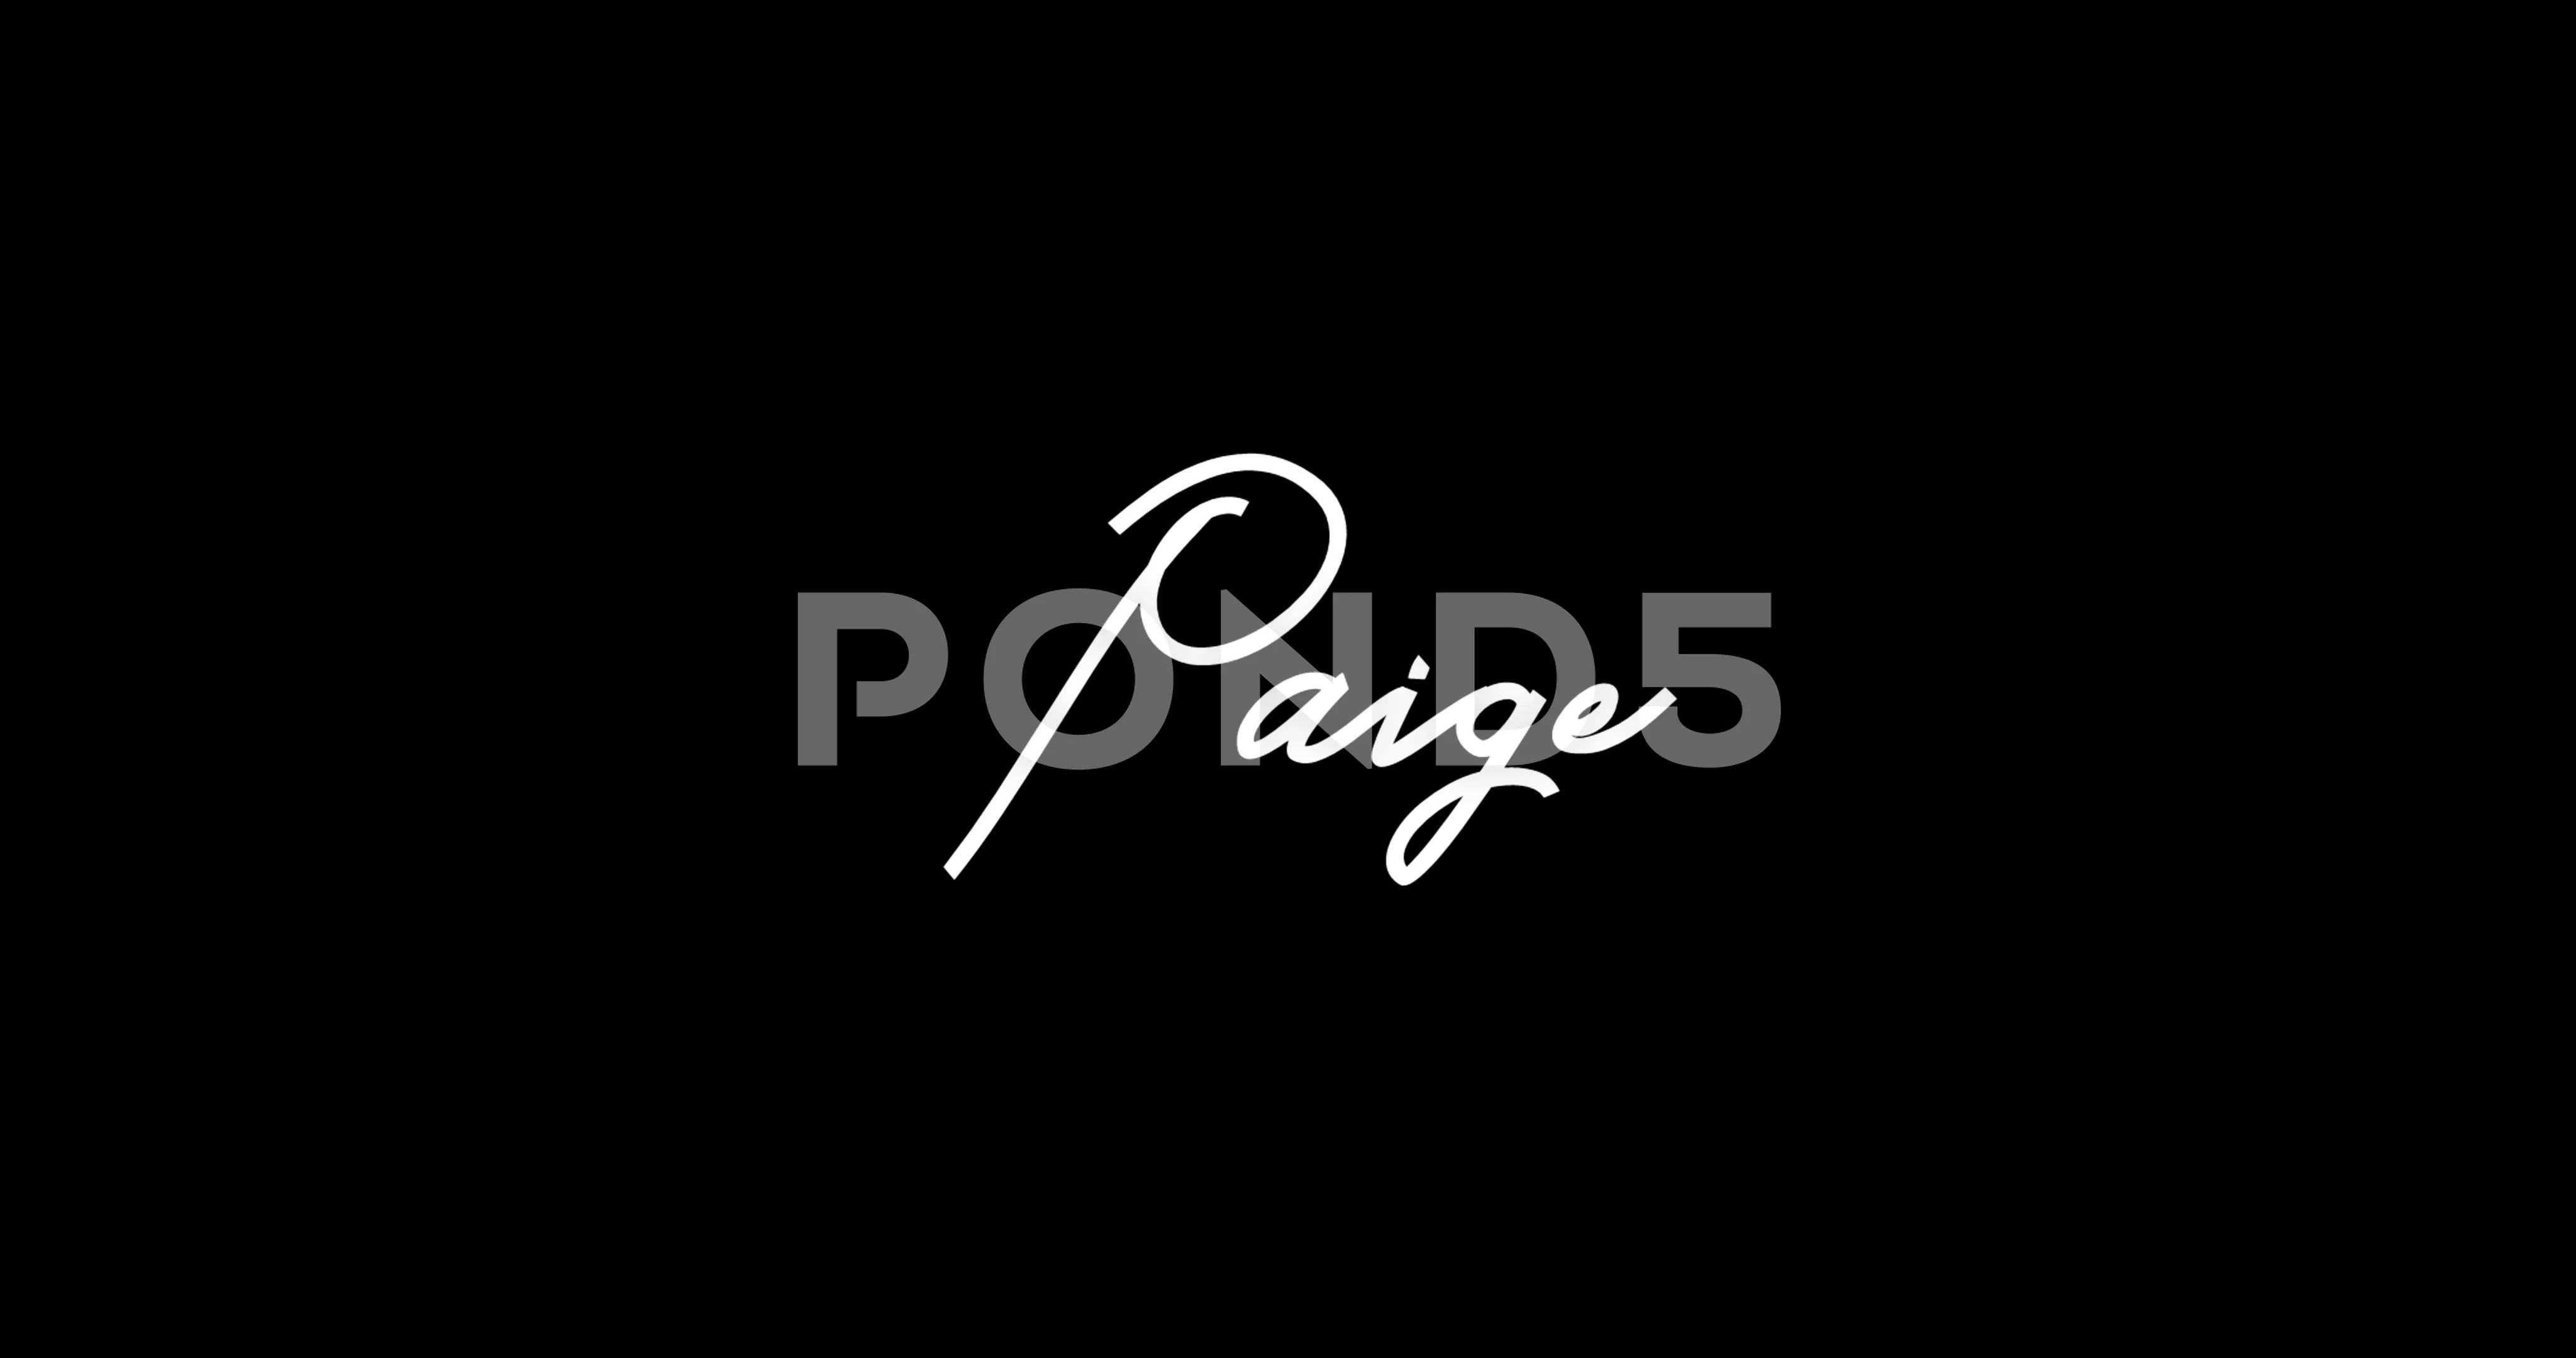 Paige Female Name Animated Cursive Calligraphy Lettering